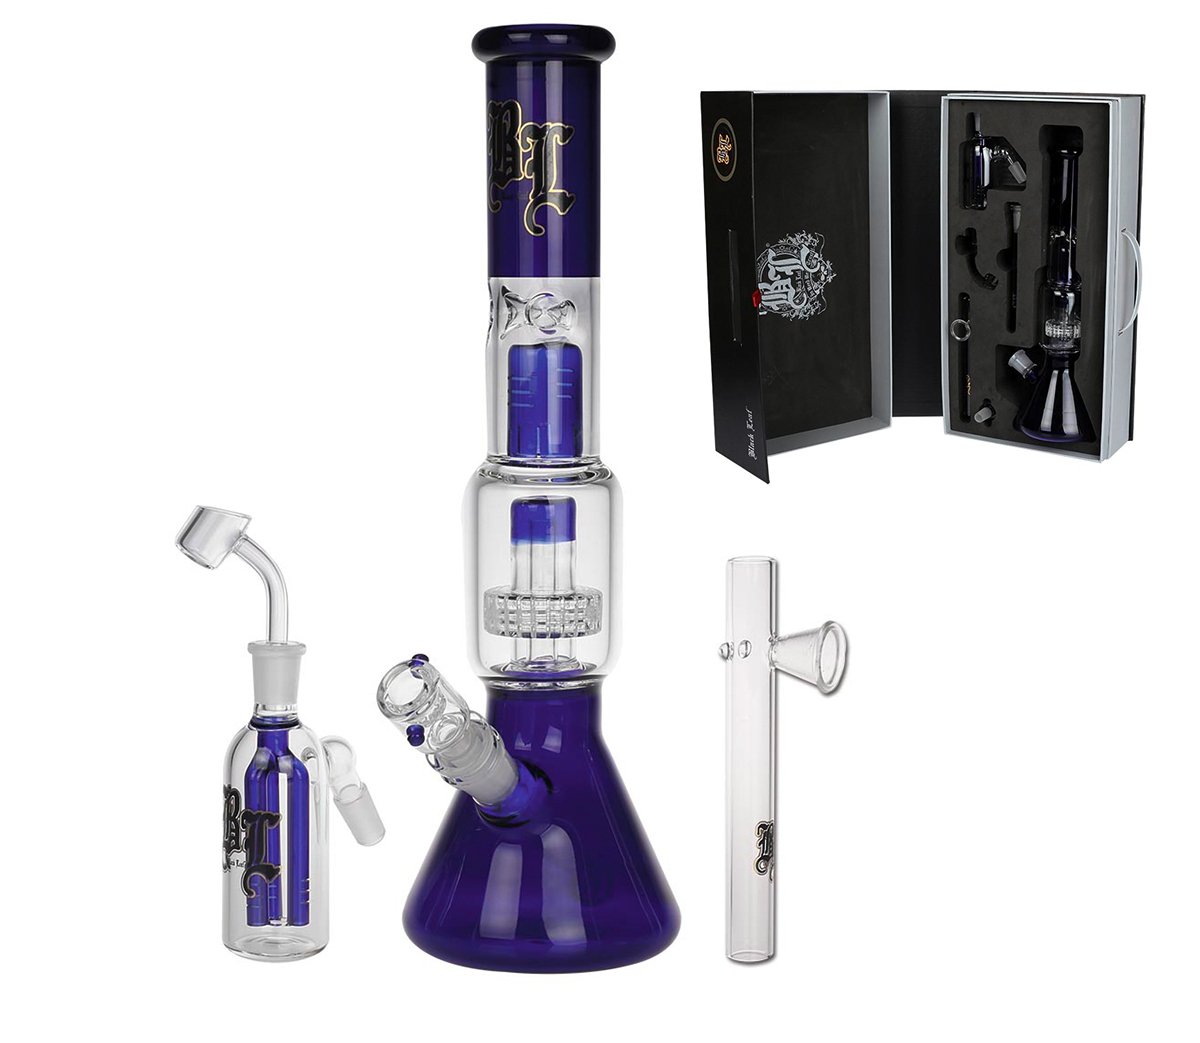 Boxed Blue Bong Set for Herbs and Oil